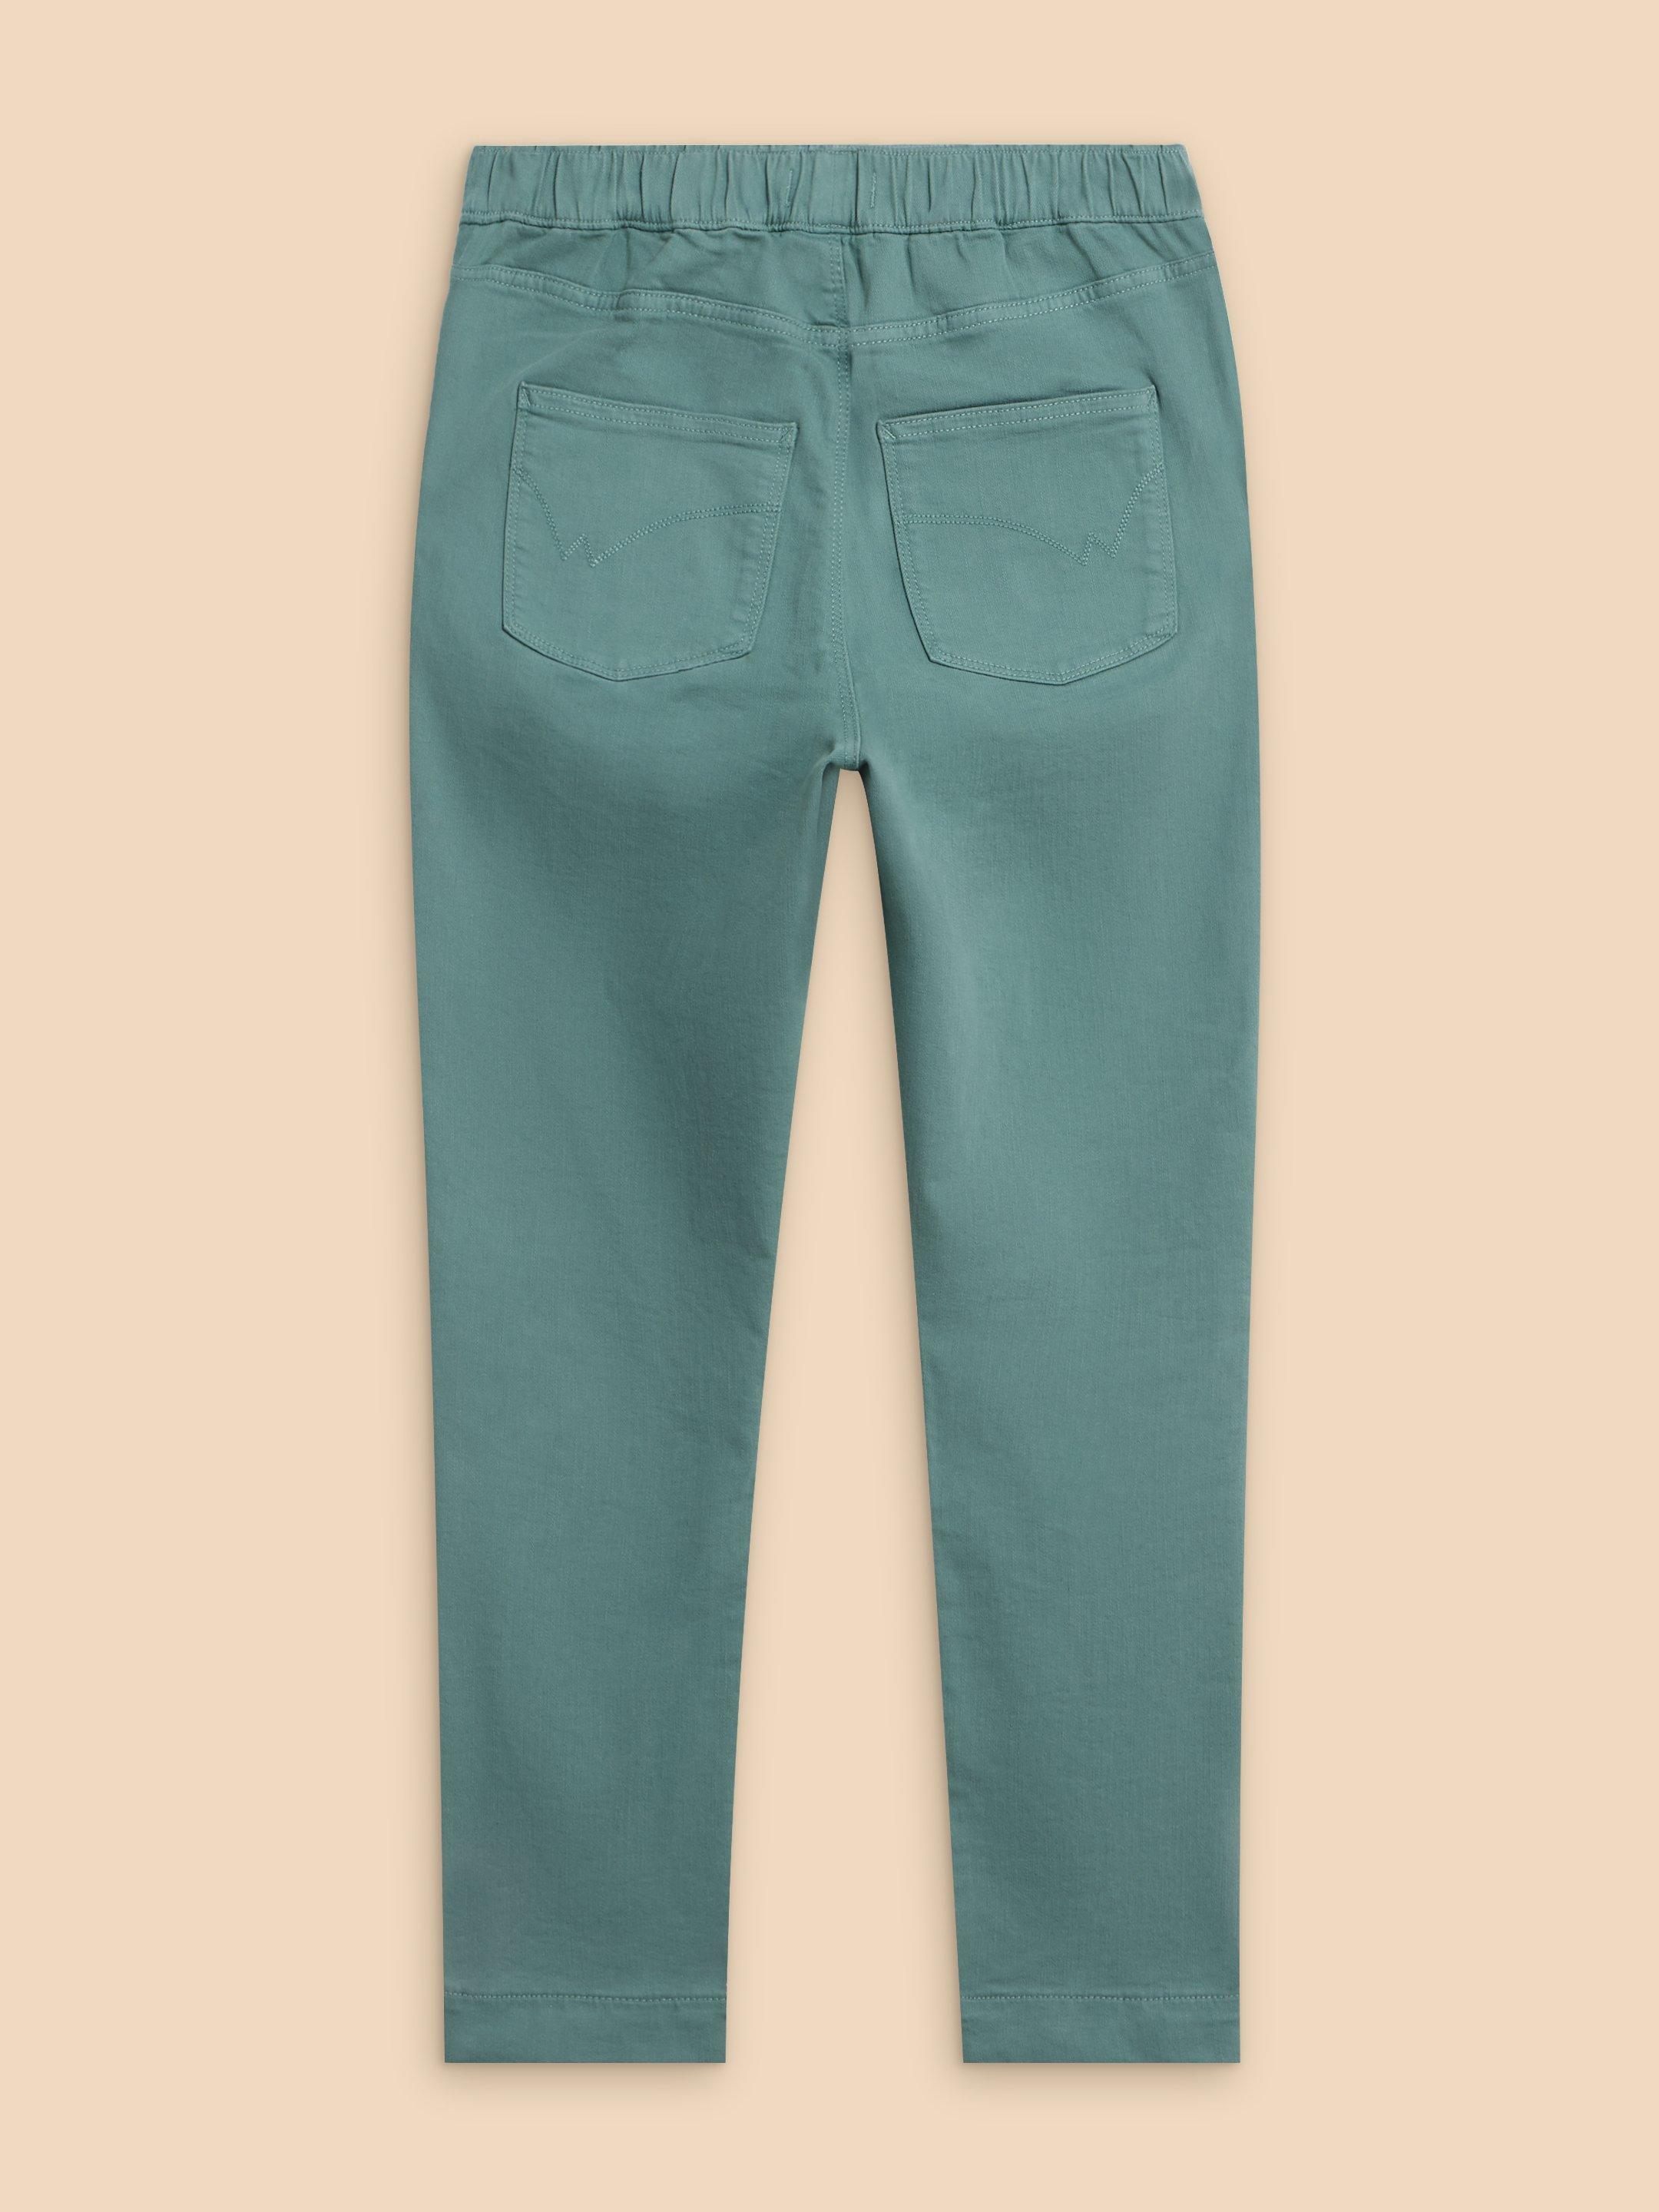 Janey Cotton Cropped Jegging in MID TEAL - FLAT BACK